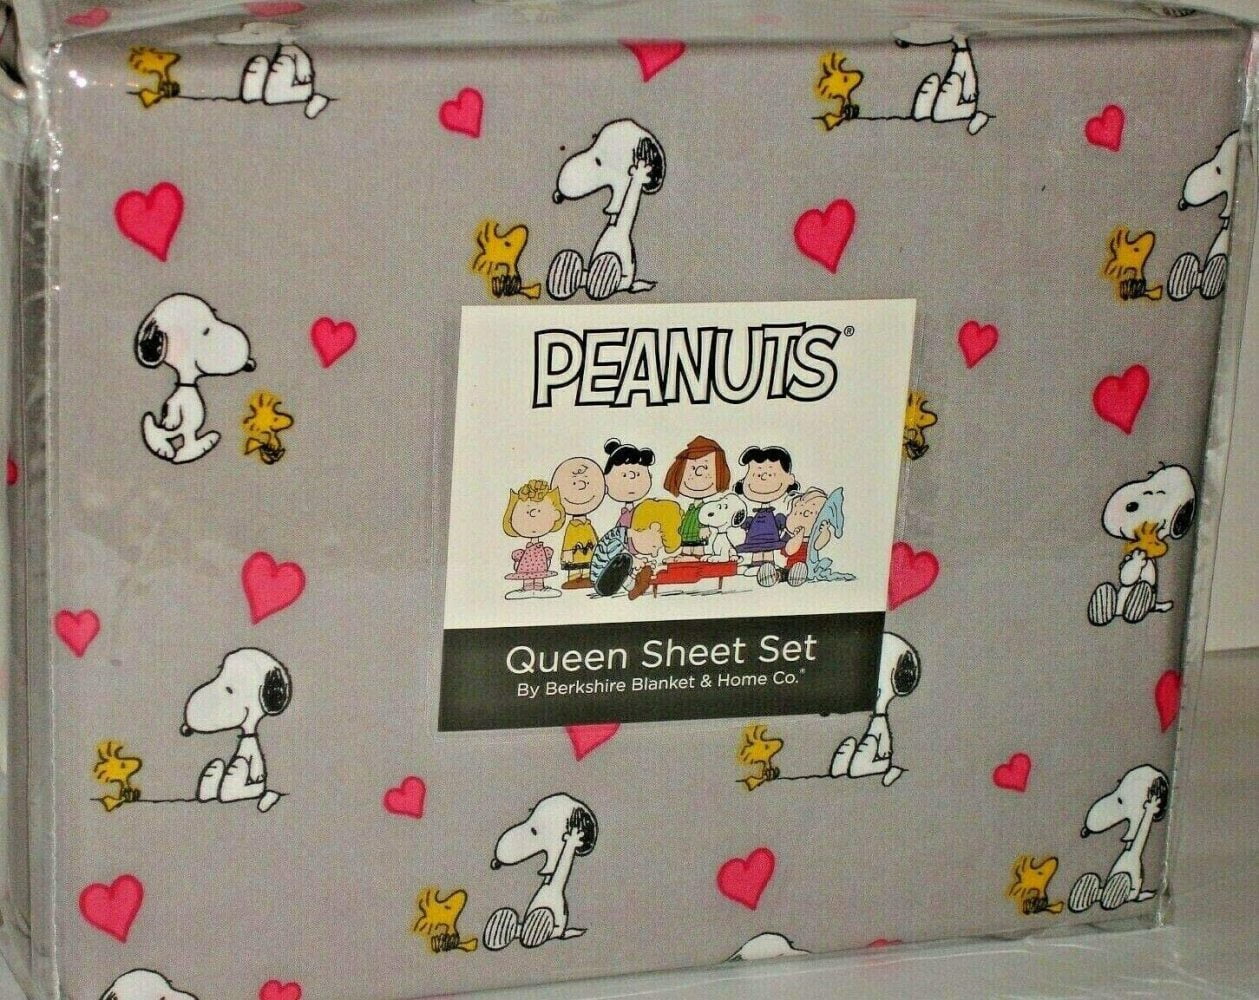 Details about   Peanuts Snoopy & Woodstock QUEEN Sheet Set Love Pink Hearts Friends Gray NEW 